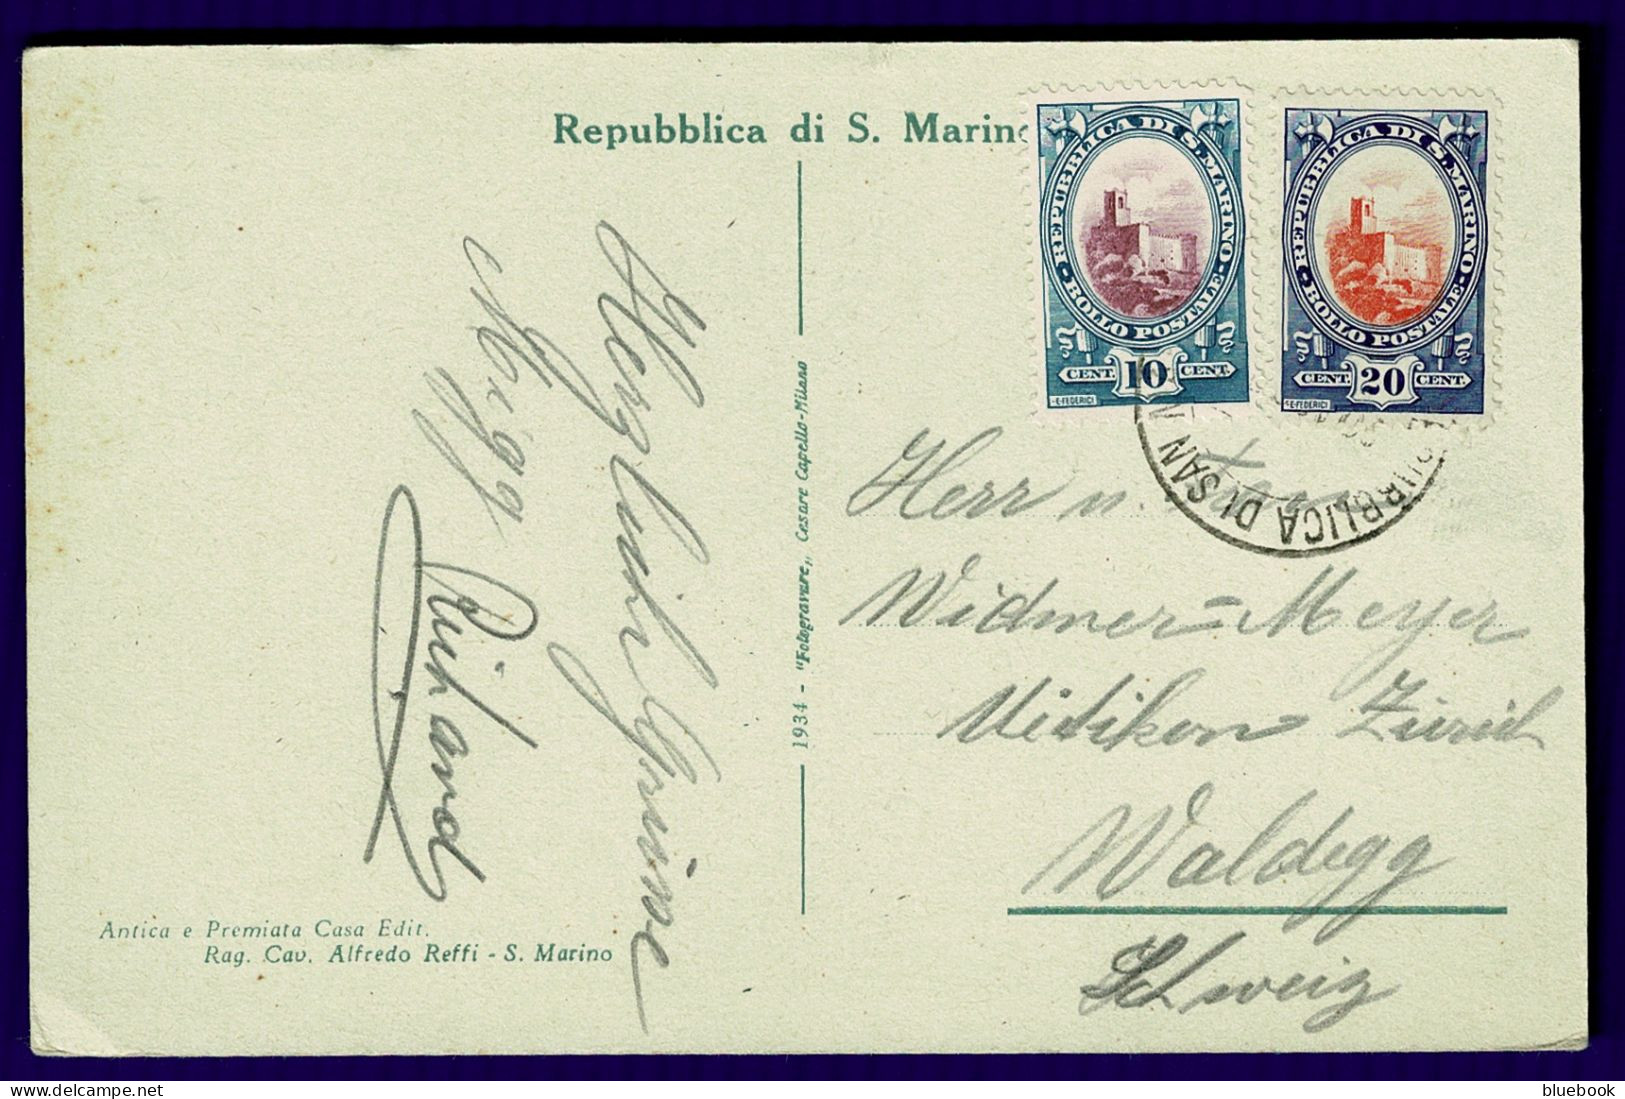 Ref 1650 - Early Postcard - San Marino Italy 30c Rate To Switzerland - Covers & Documents